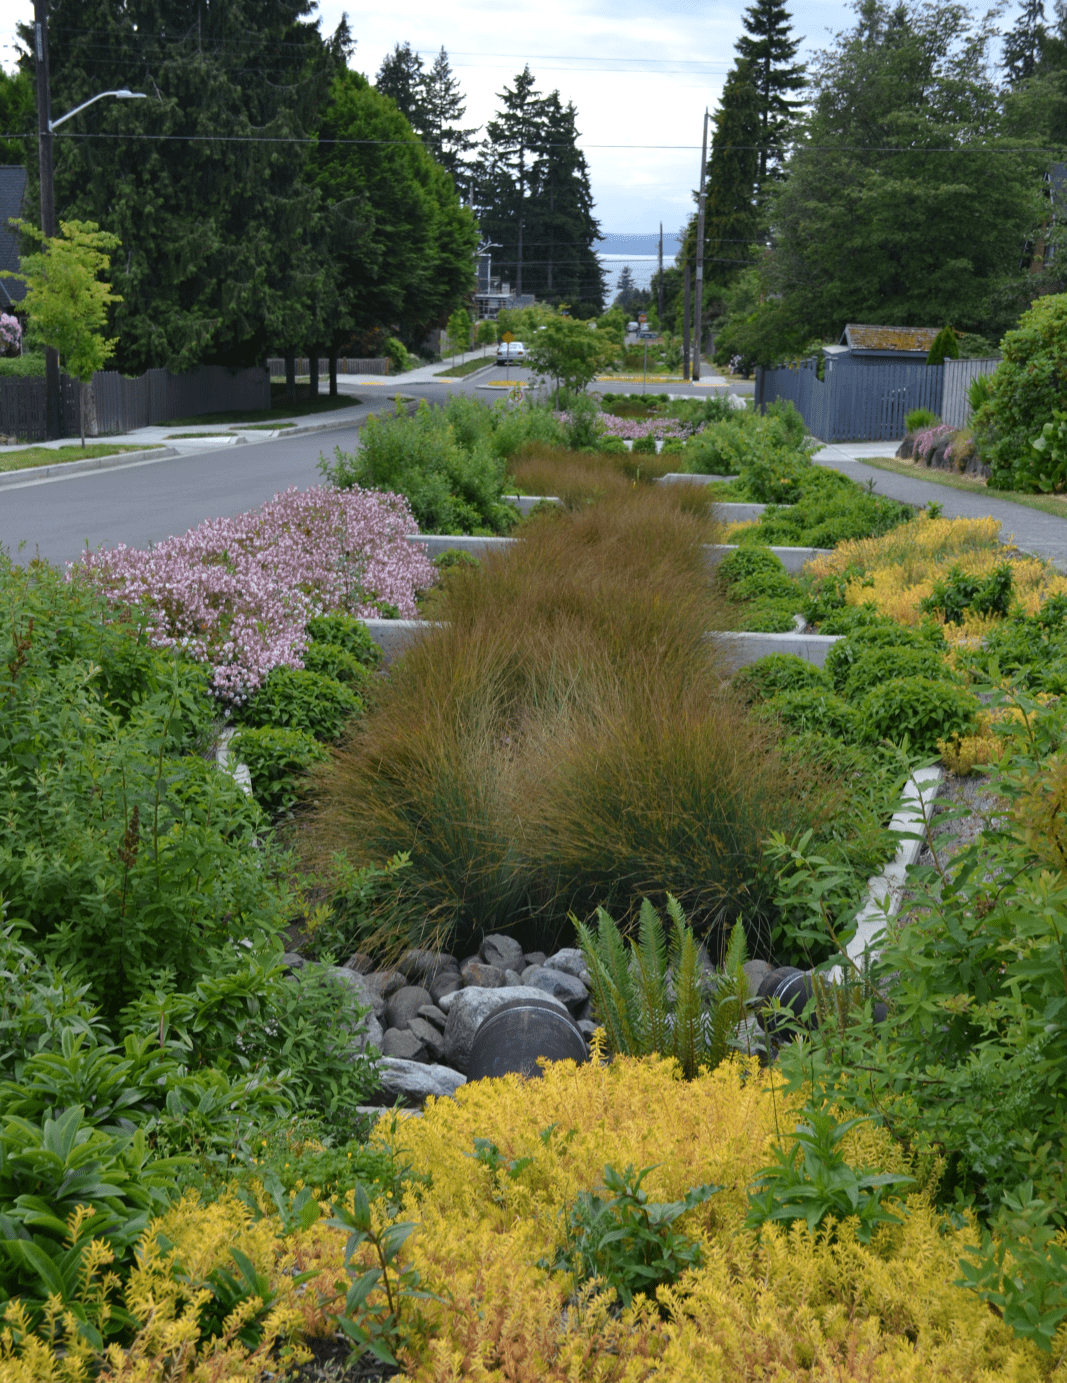 The photo is of a green stormwater infrastructure, that is between a street and sidewalk. This infrastructure has a bioretention system, so it has landscaping that is designed to filter pollutants from entering the waterways. The landscaping includes grasses, shrubs of different colors, and soils.